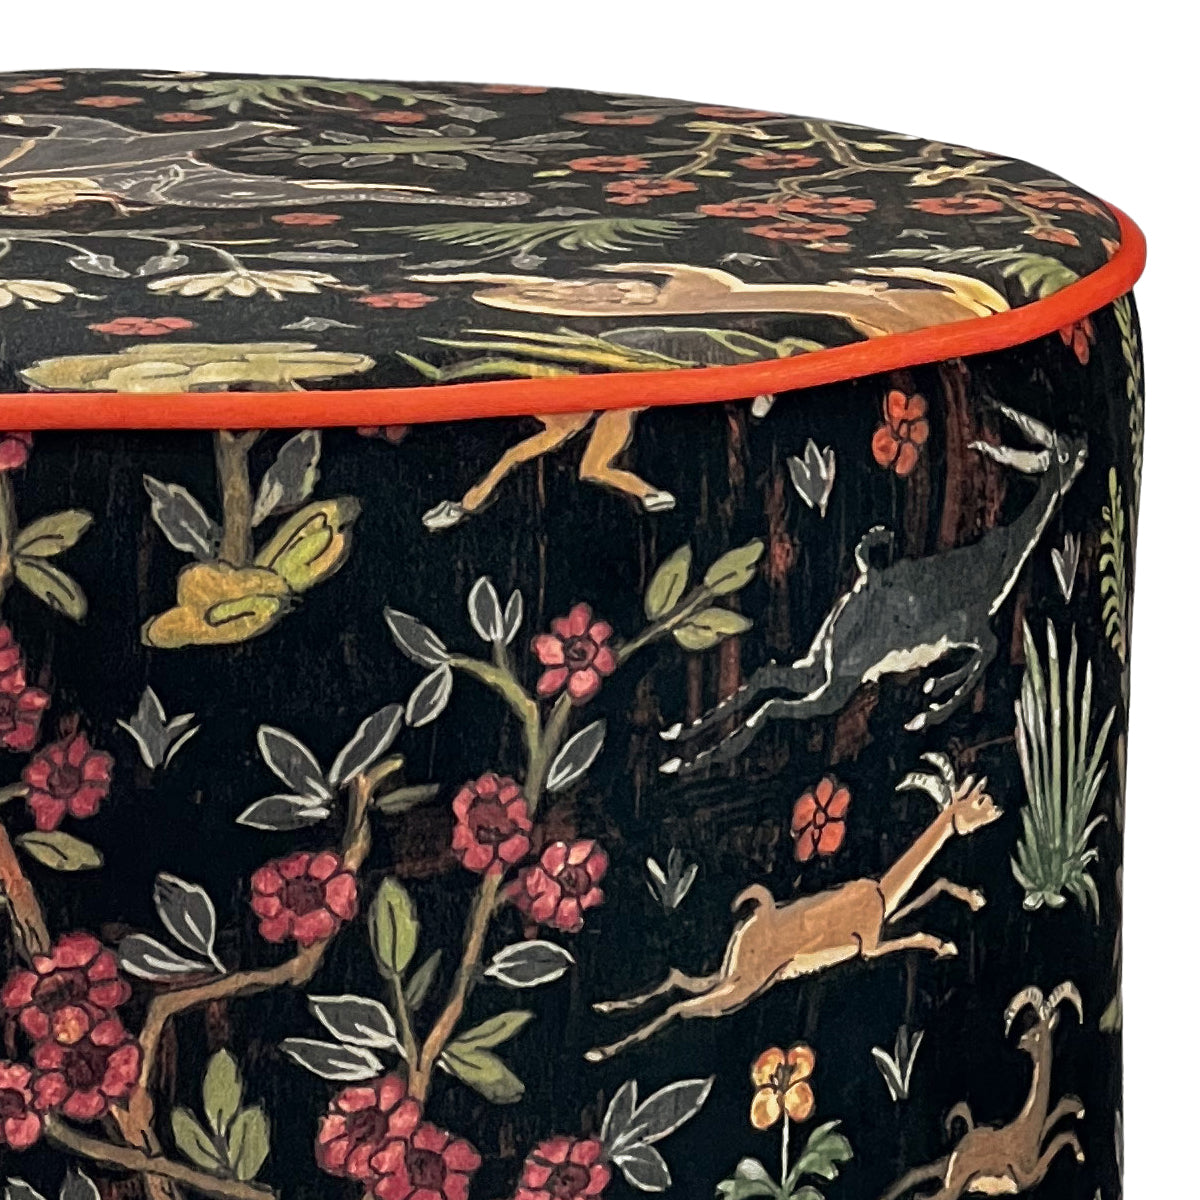 Raj Onyx Pouffe, Footstool - Courthouse Exclusive Made in the UK